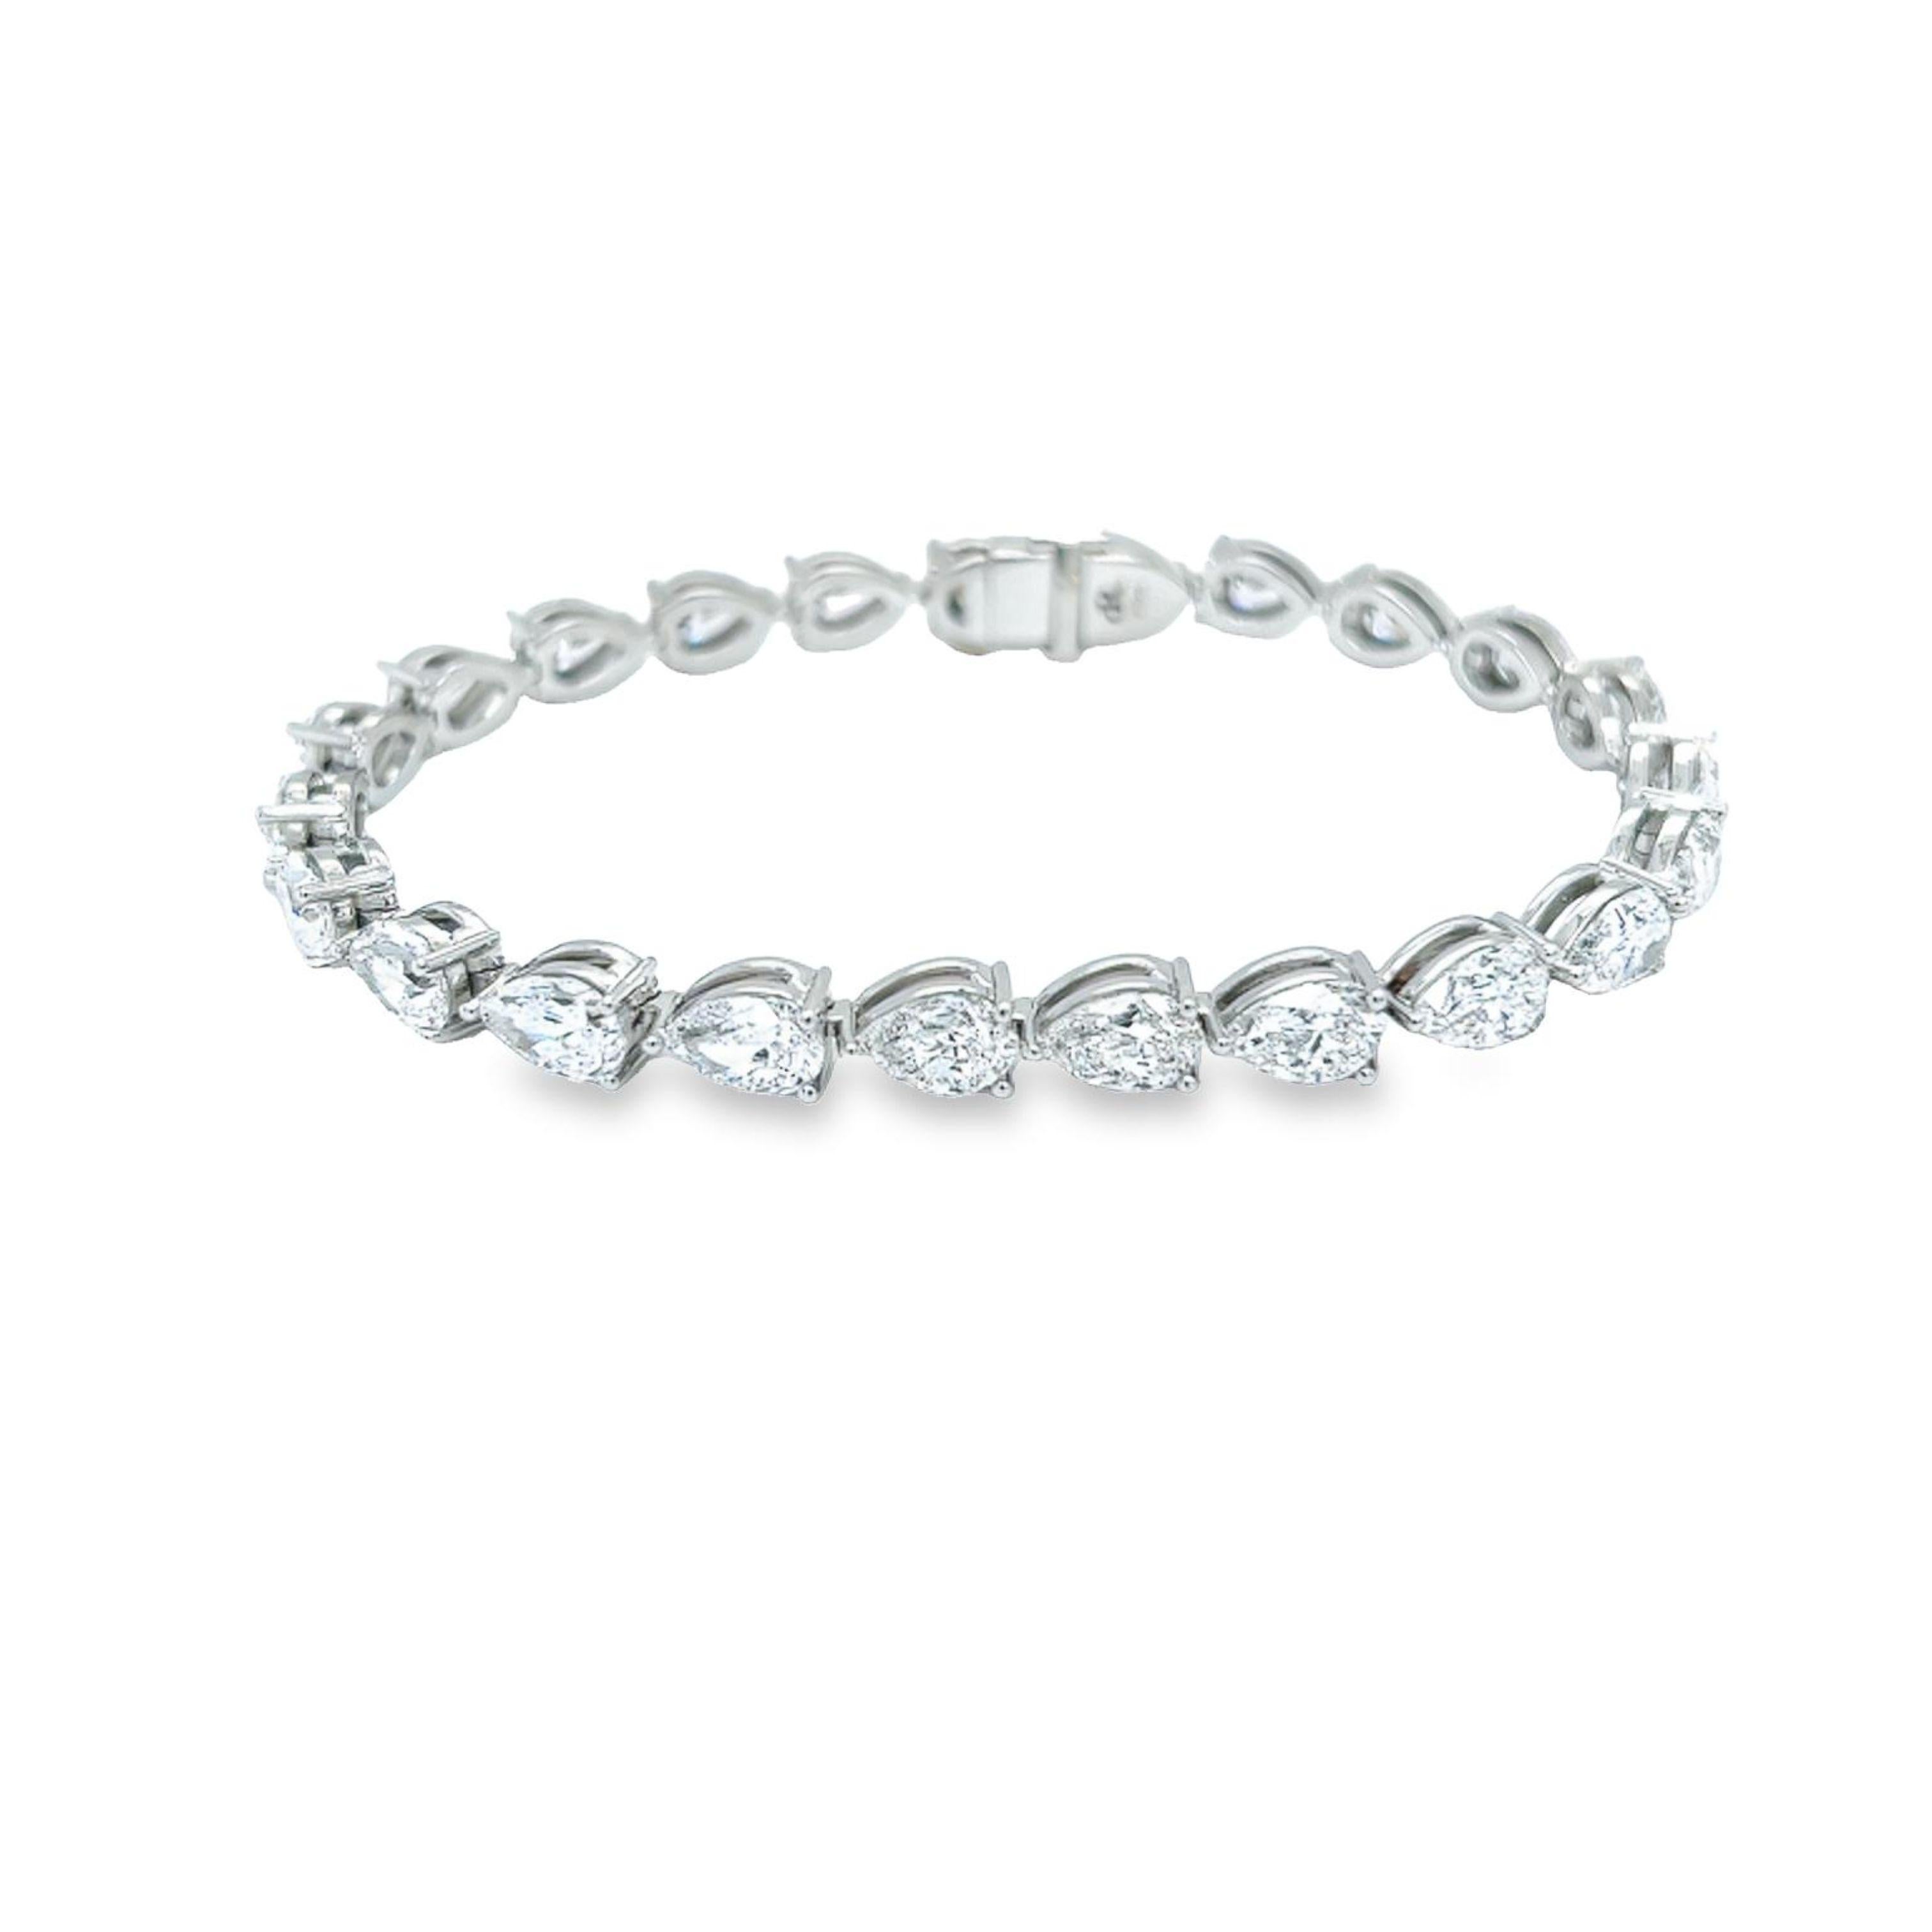 Rosenberg Diamonds & Co. 16.13 carat total weight Pear shape diamond tennis bracelet set in platinum 7 inch. This beautiful straight line bracelet consists of .70 carats, D-F in color VS2-IF in clarity. Each 23 stones are perfectly matched, top